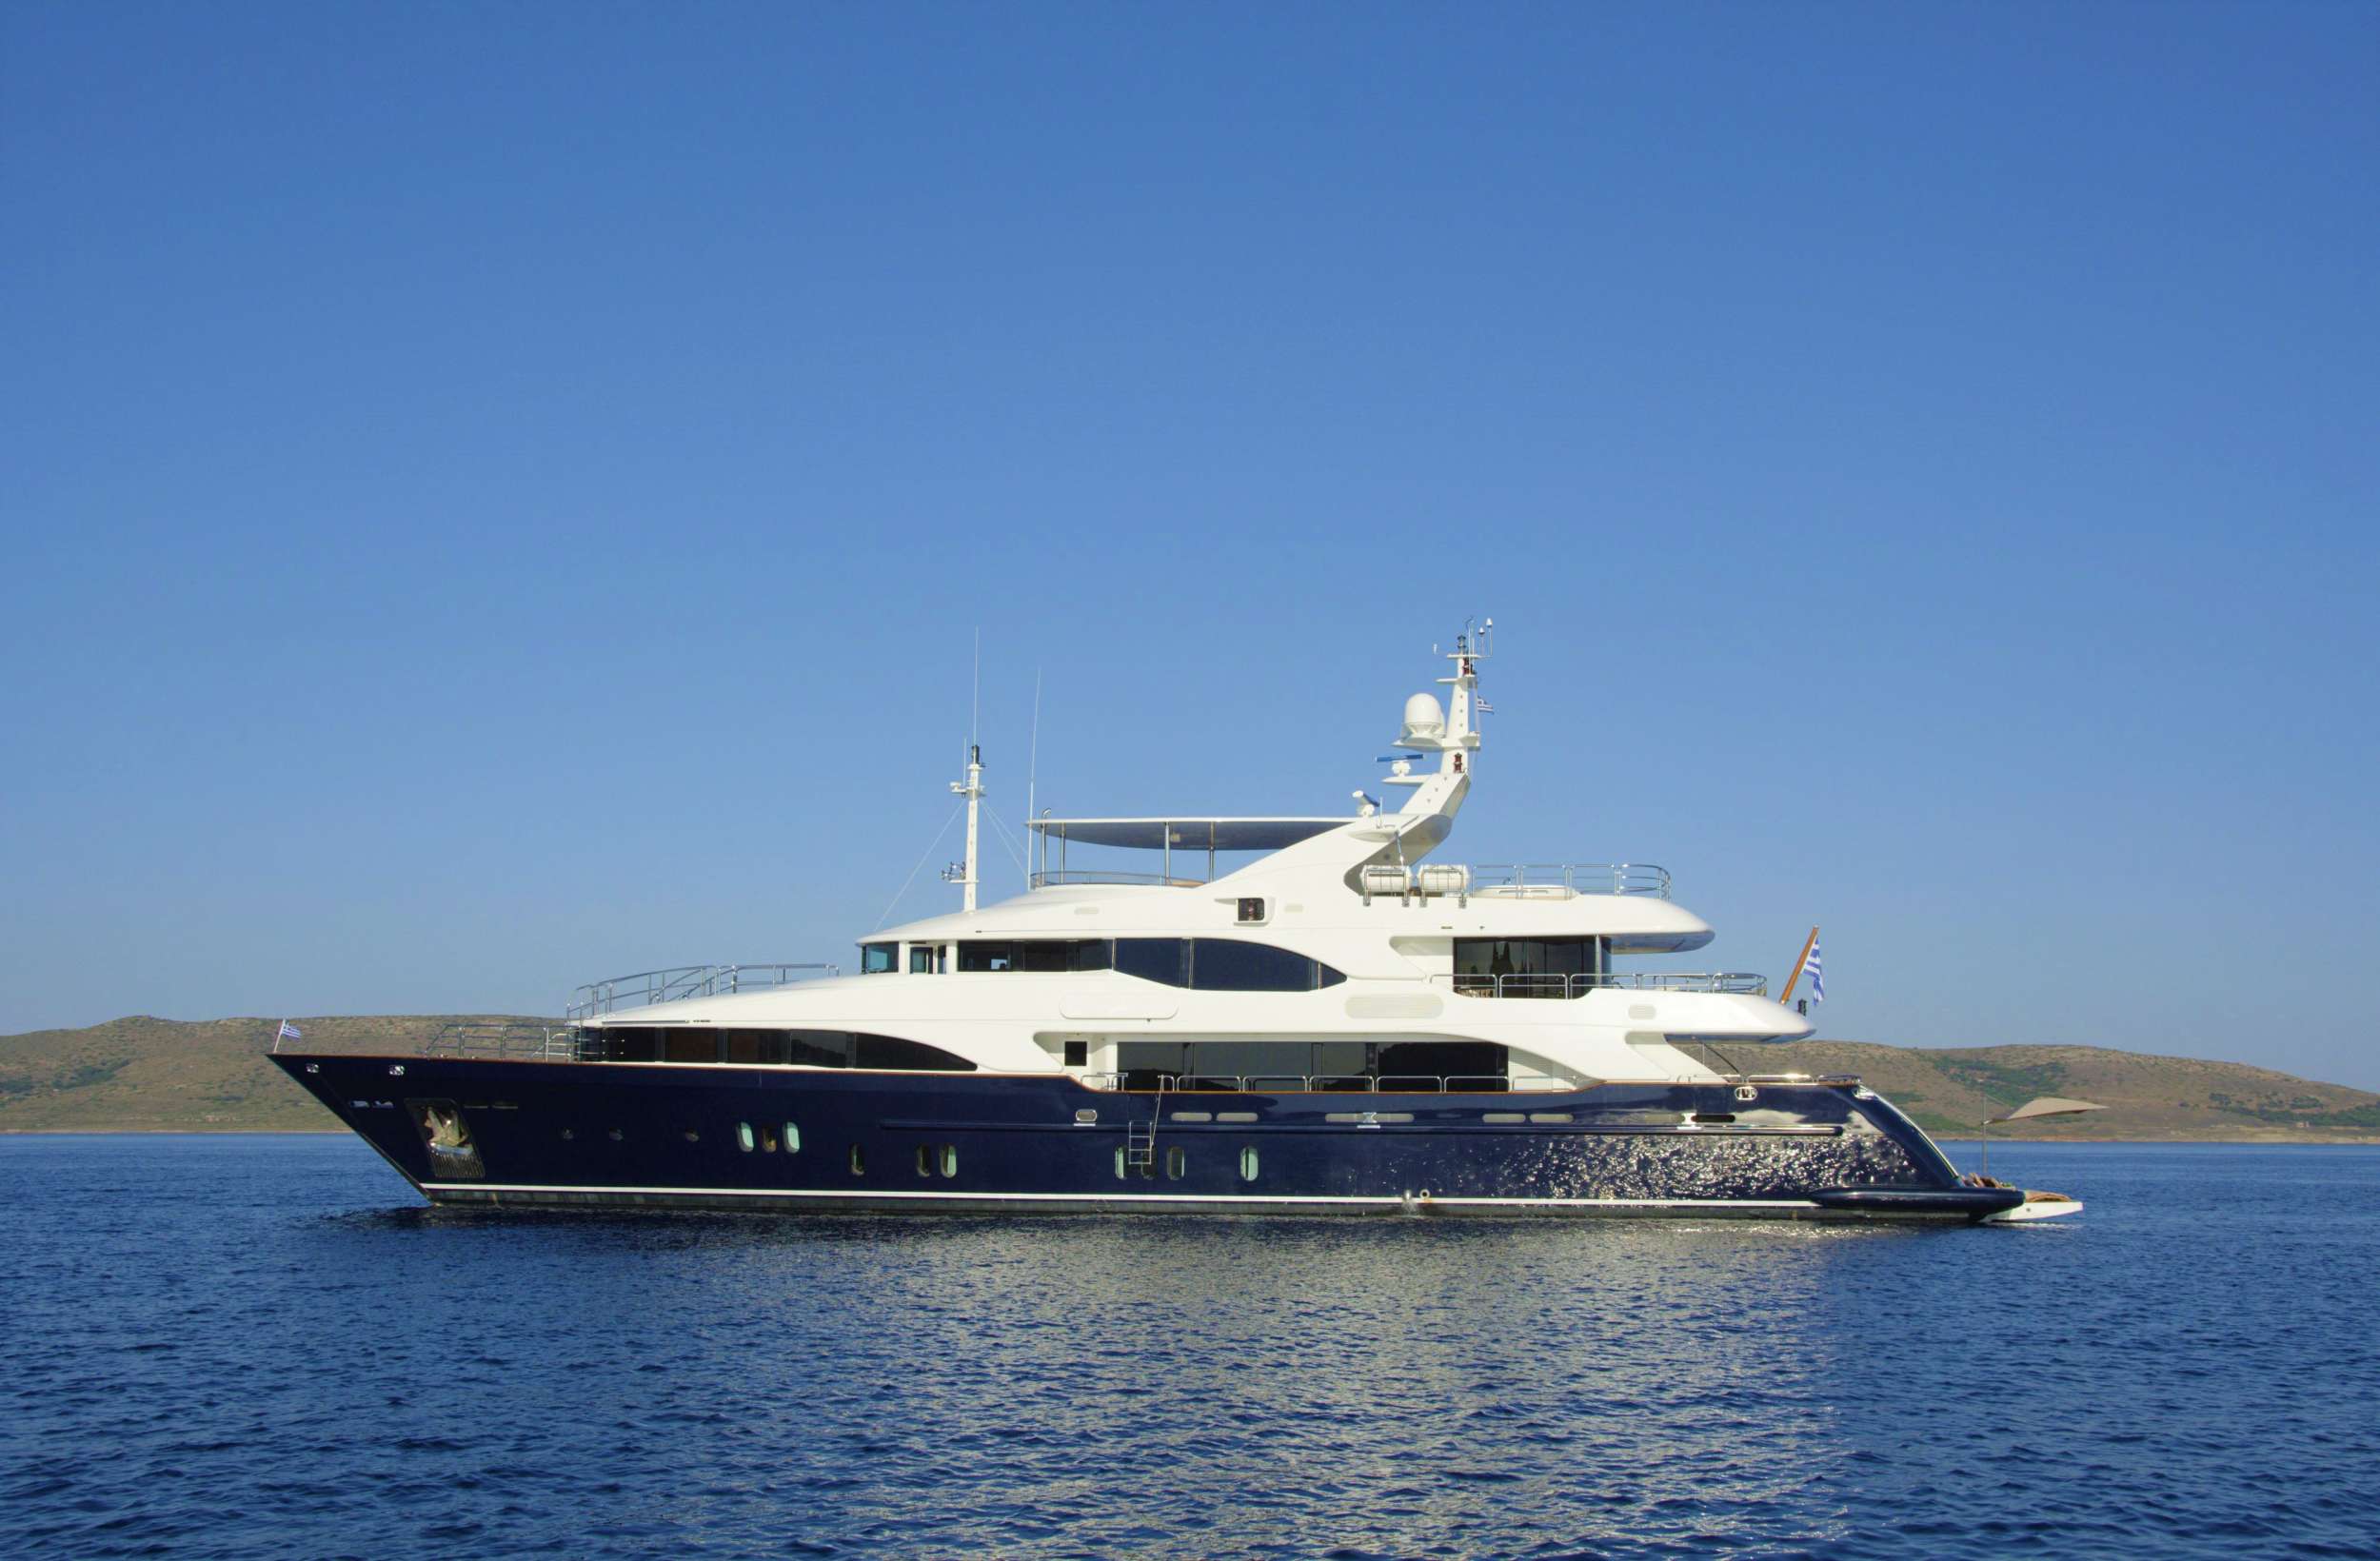 Grande Amore Benetti 145 crewed motor yacht charter at anchor in Greece